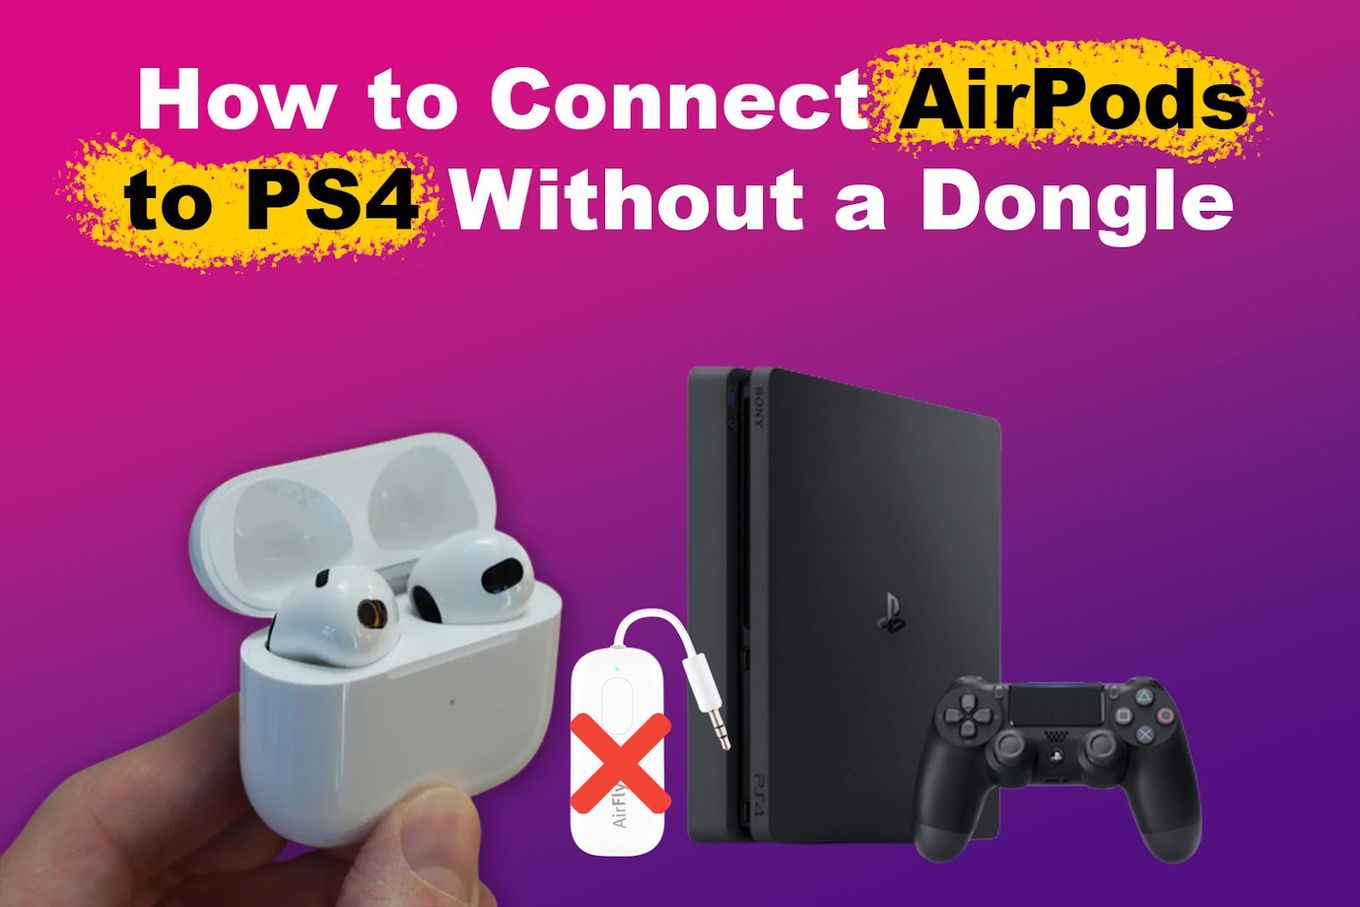 How to Connect AirPods to PS4 Without a Dongle